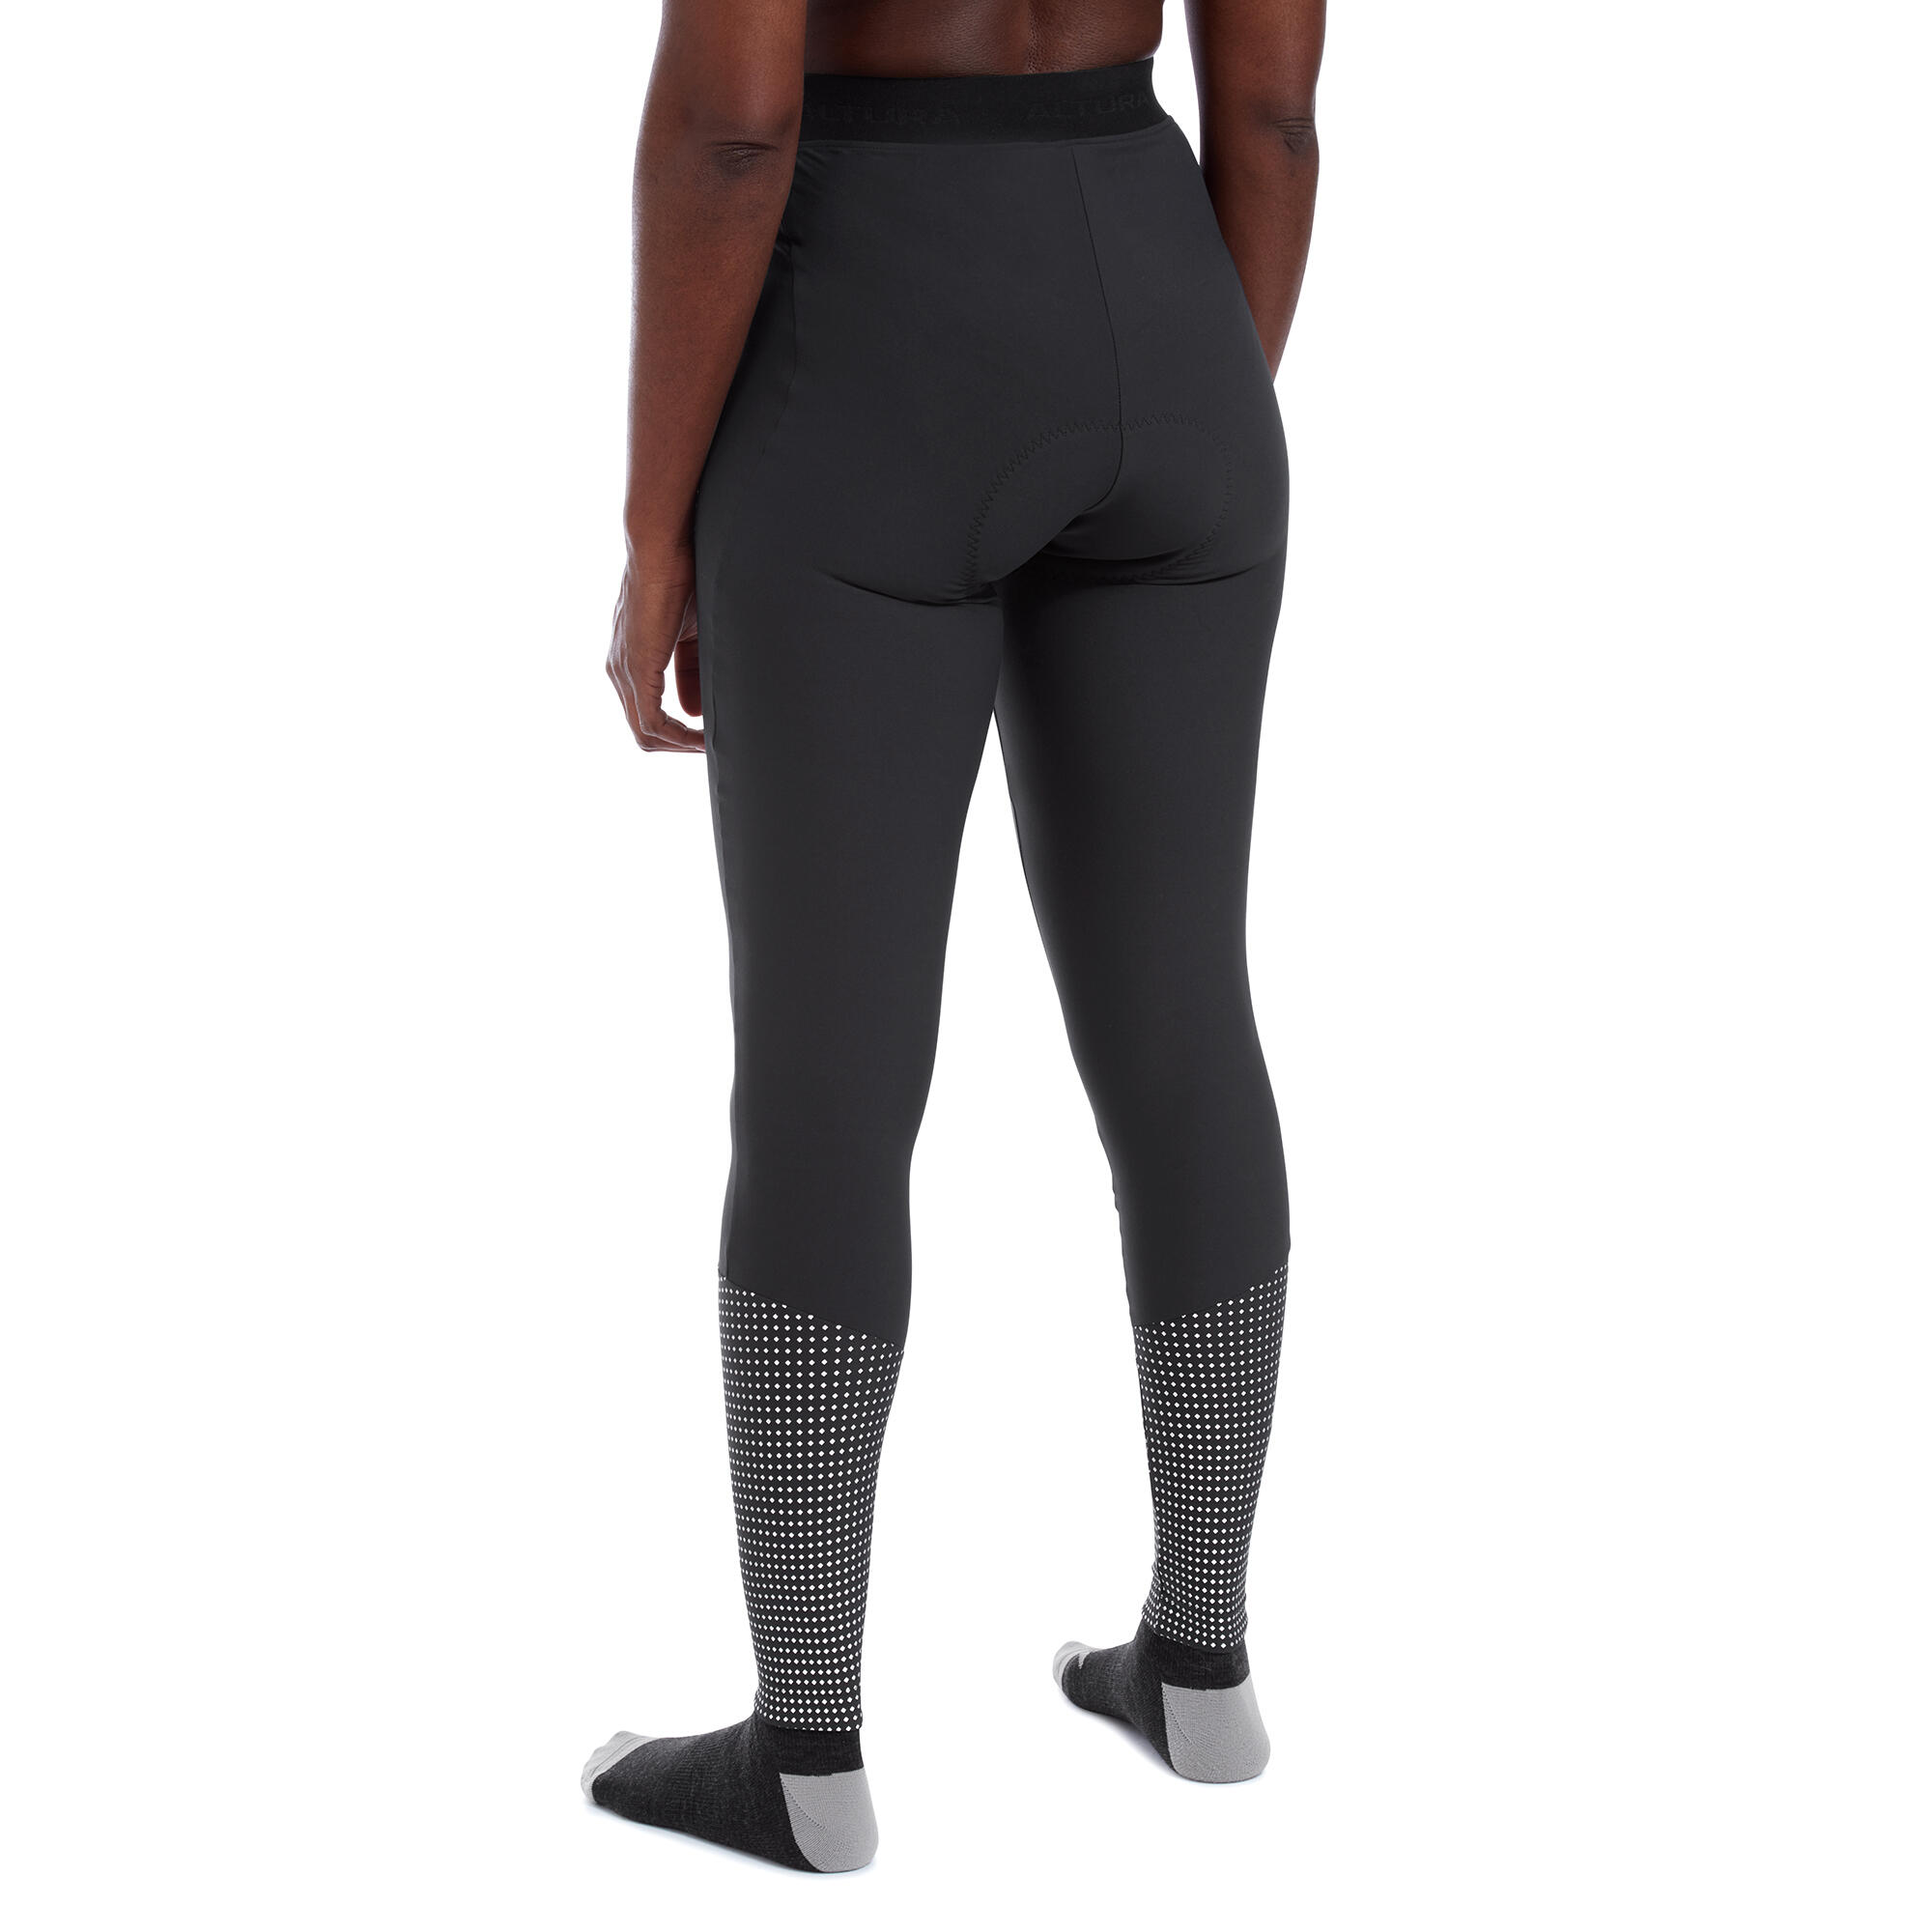 Nightvision Dwr Women's Cycling Waist Tights 2/5